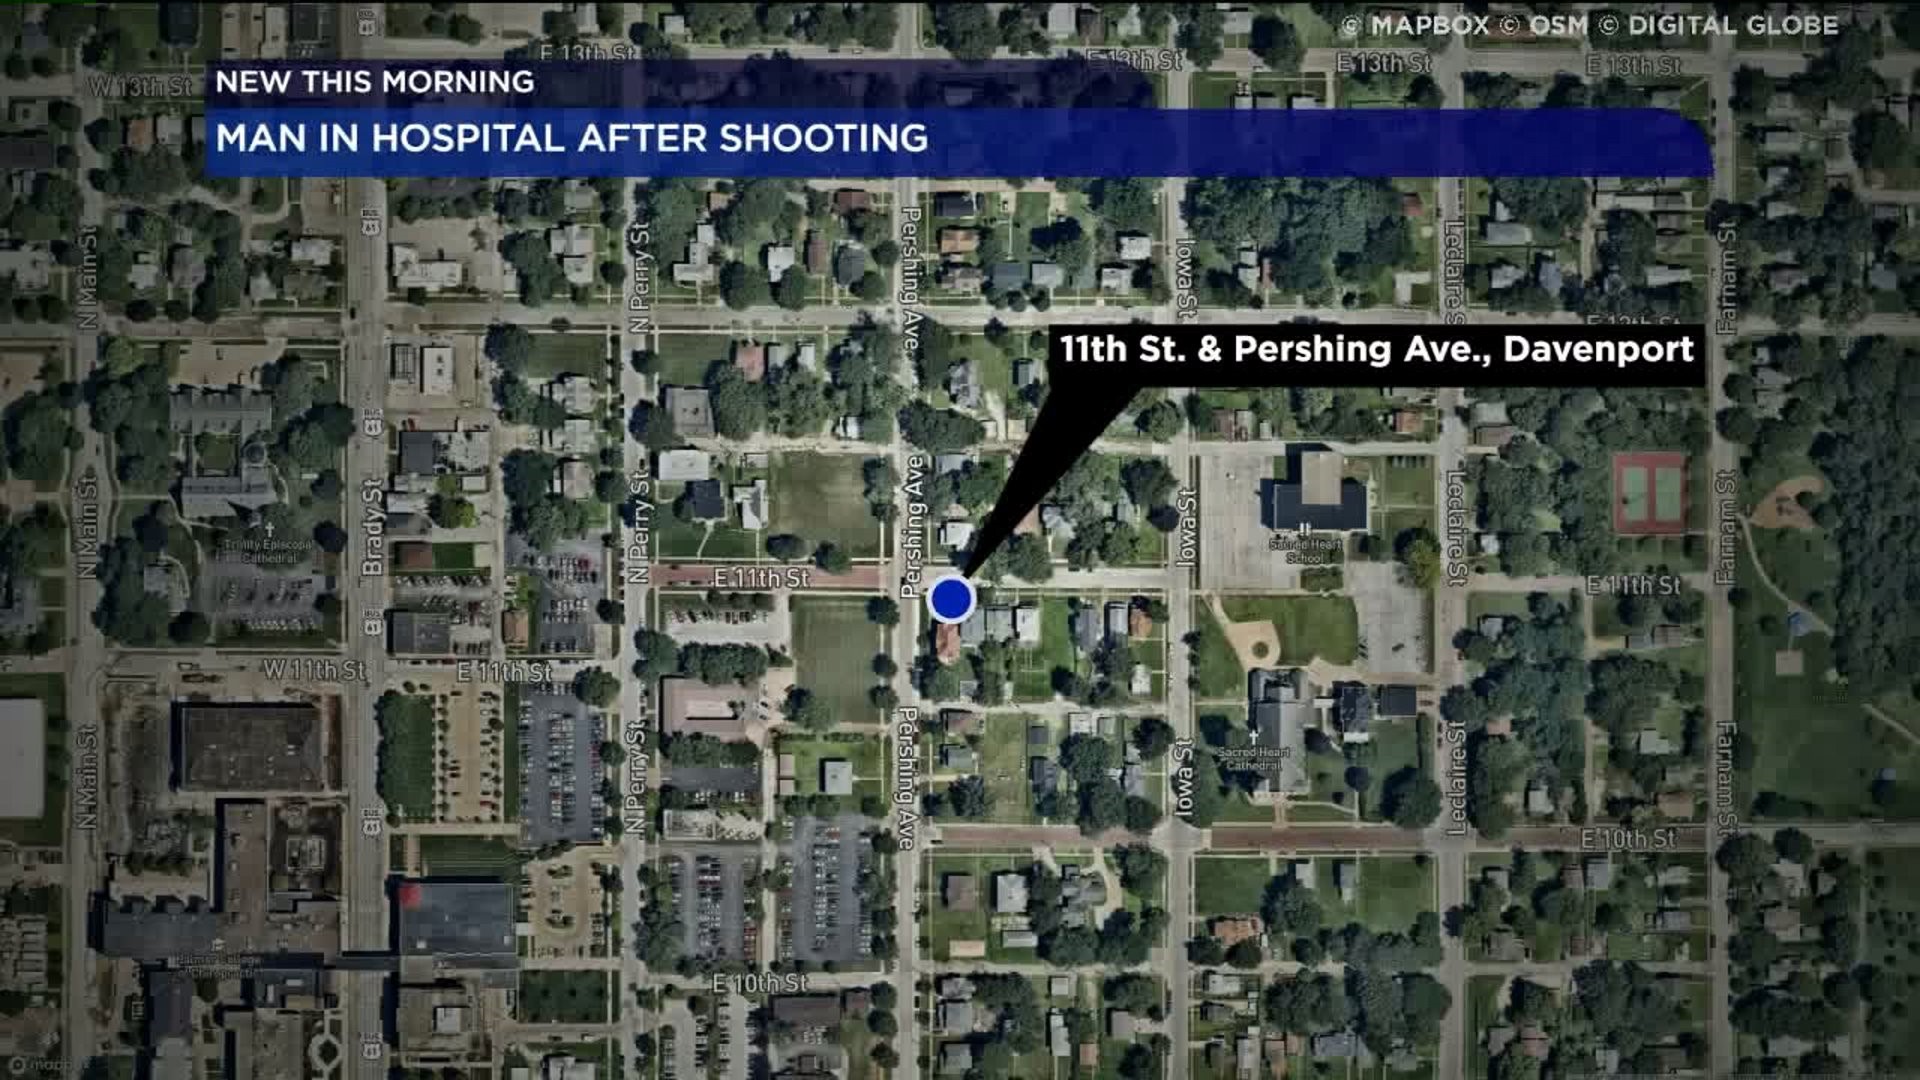 Man in Hospital After Shooting